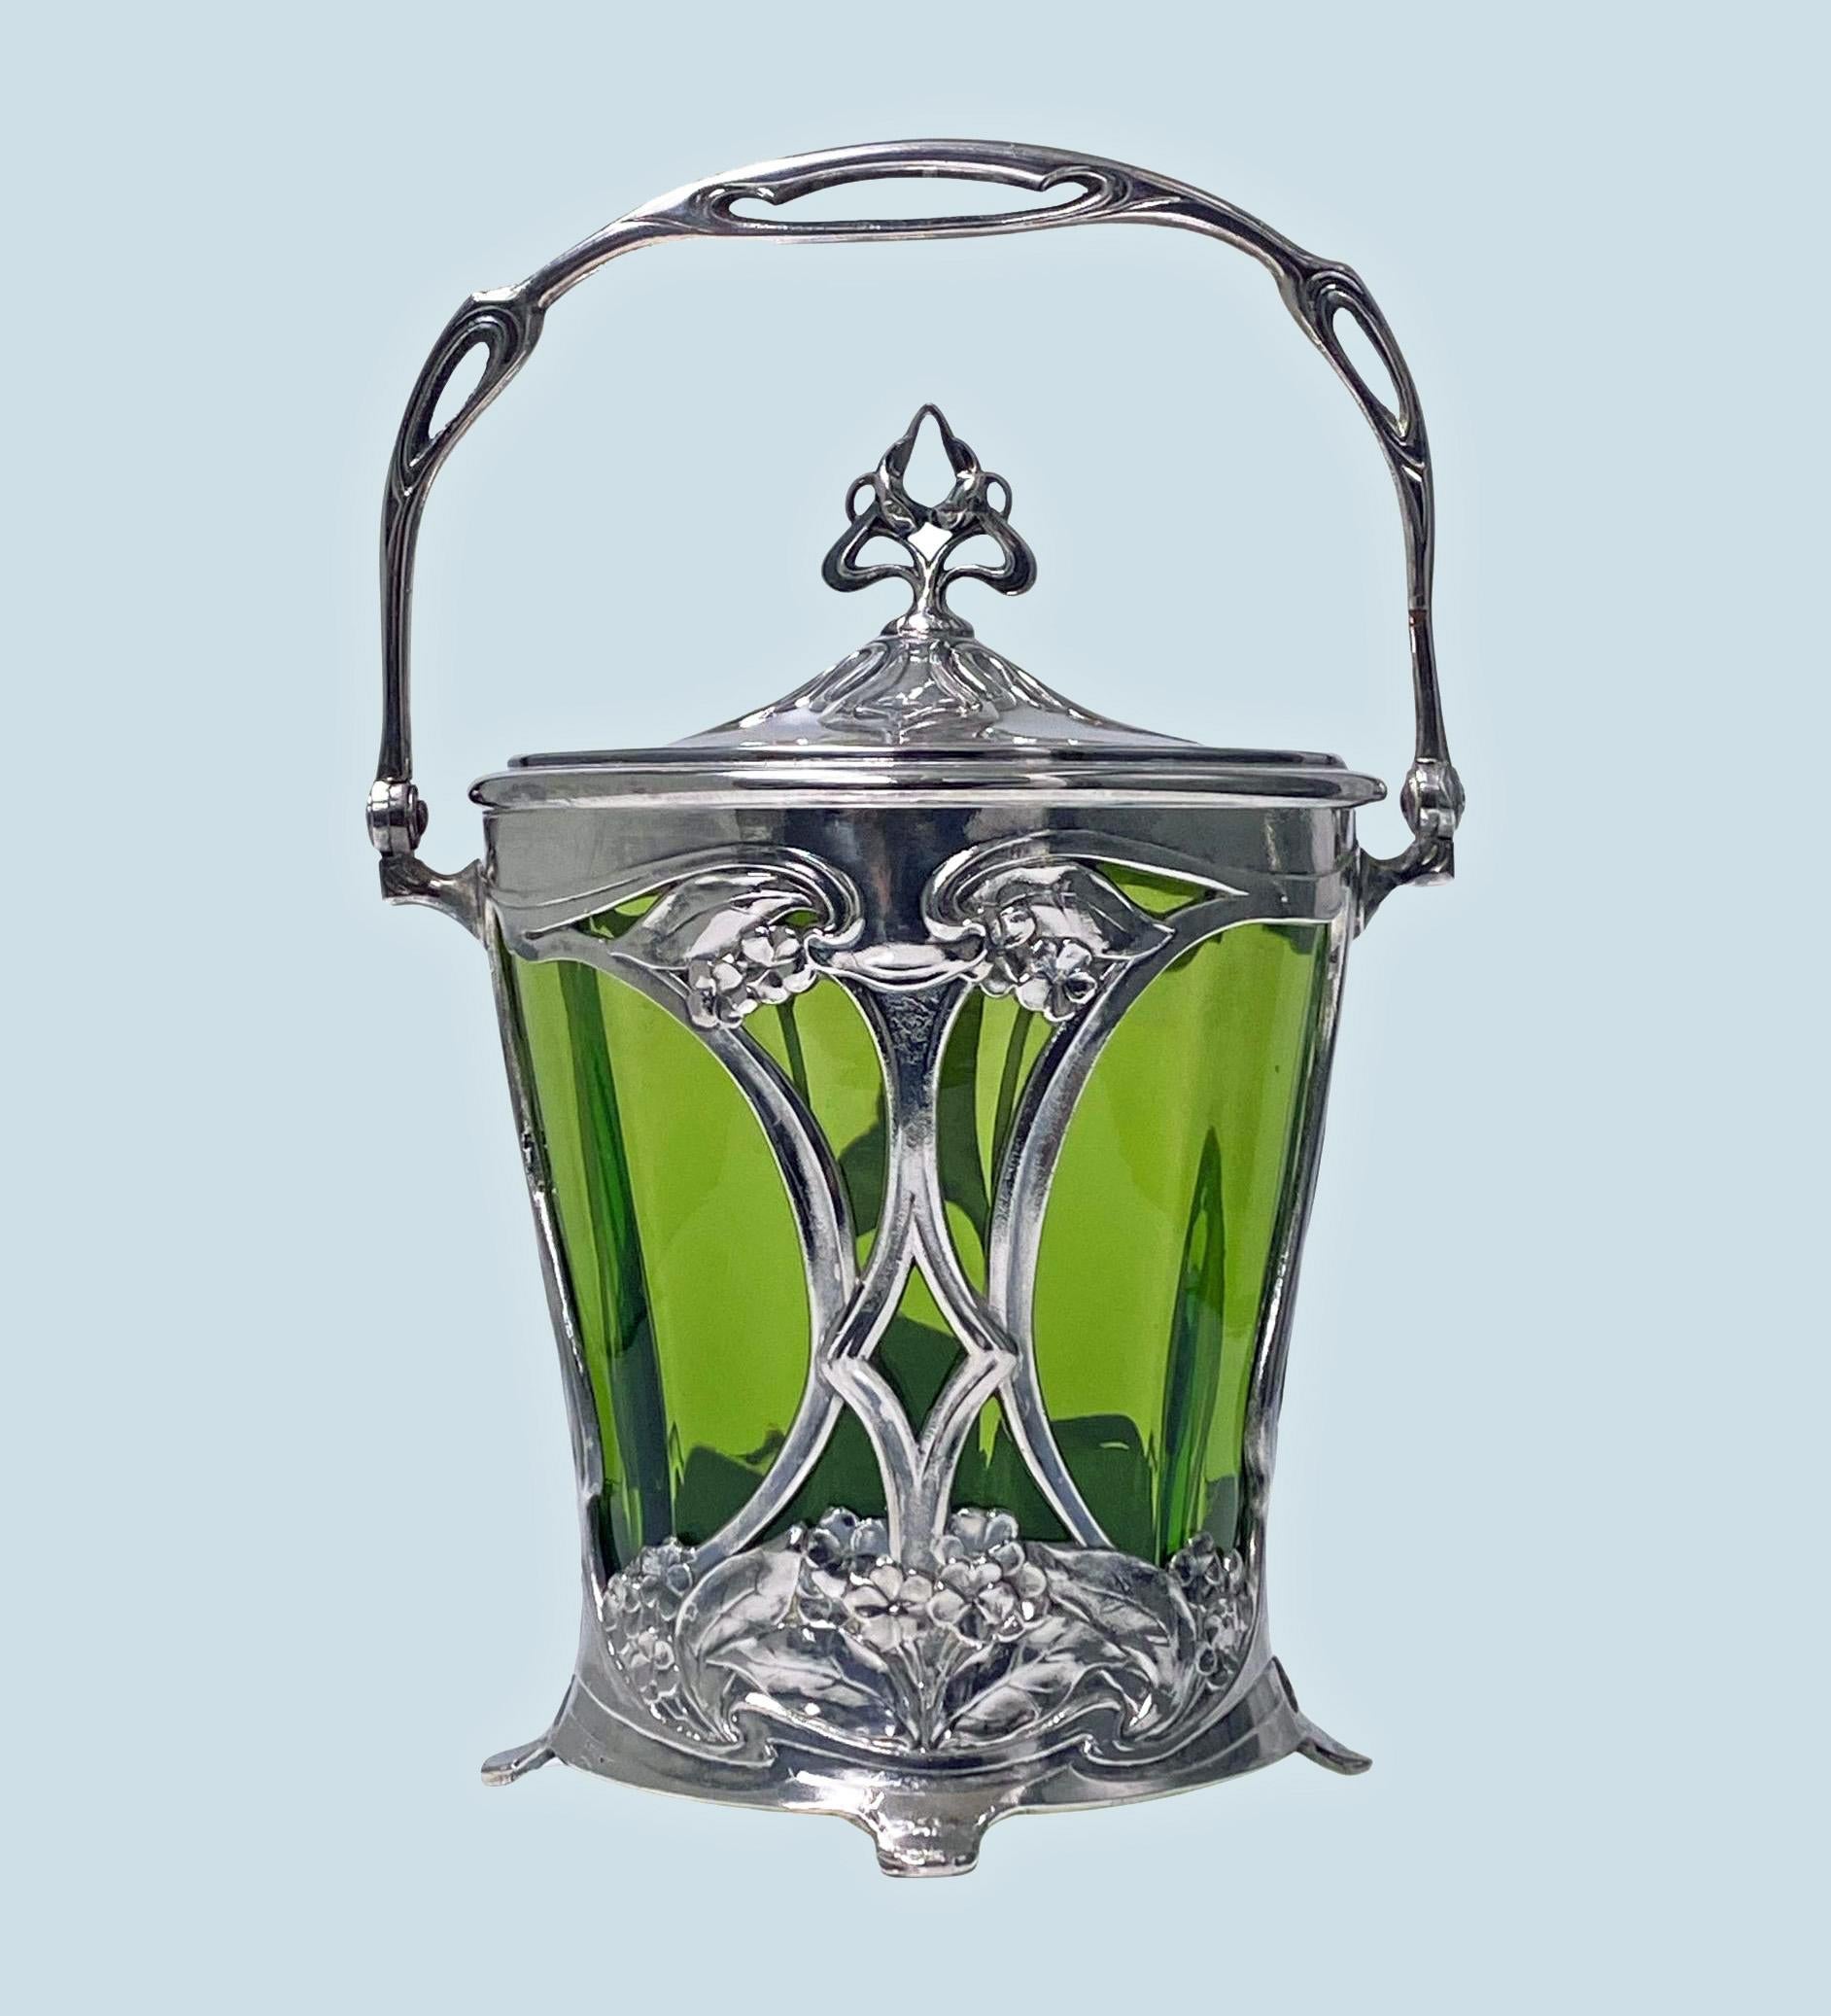 WMF Jugendstil Art Nouveau silver on pewter and glass Biscuit Box. Stamped marks running ostrich B I/0 OX and 231. Illustrated WMF 1906 Catalogue page 251 model number 231. Circa 1906. Original green paneled glass liner, the silvered pewter of